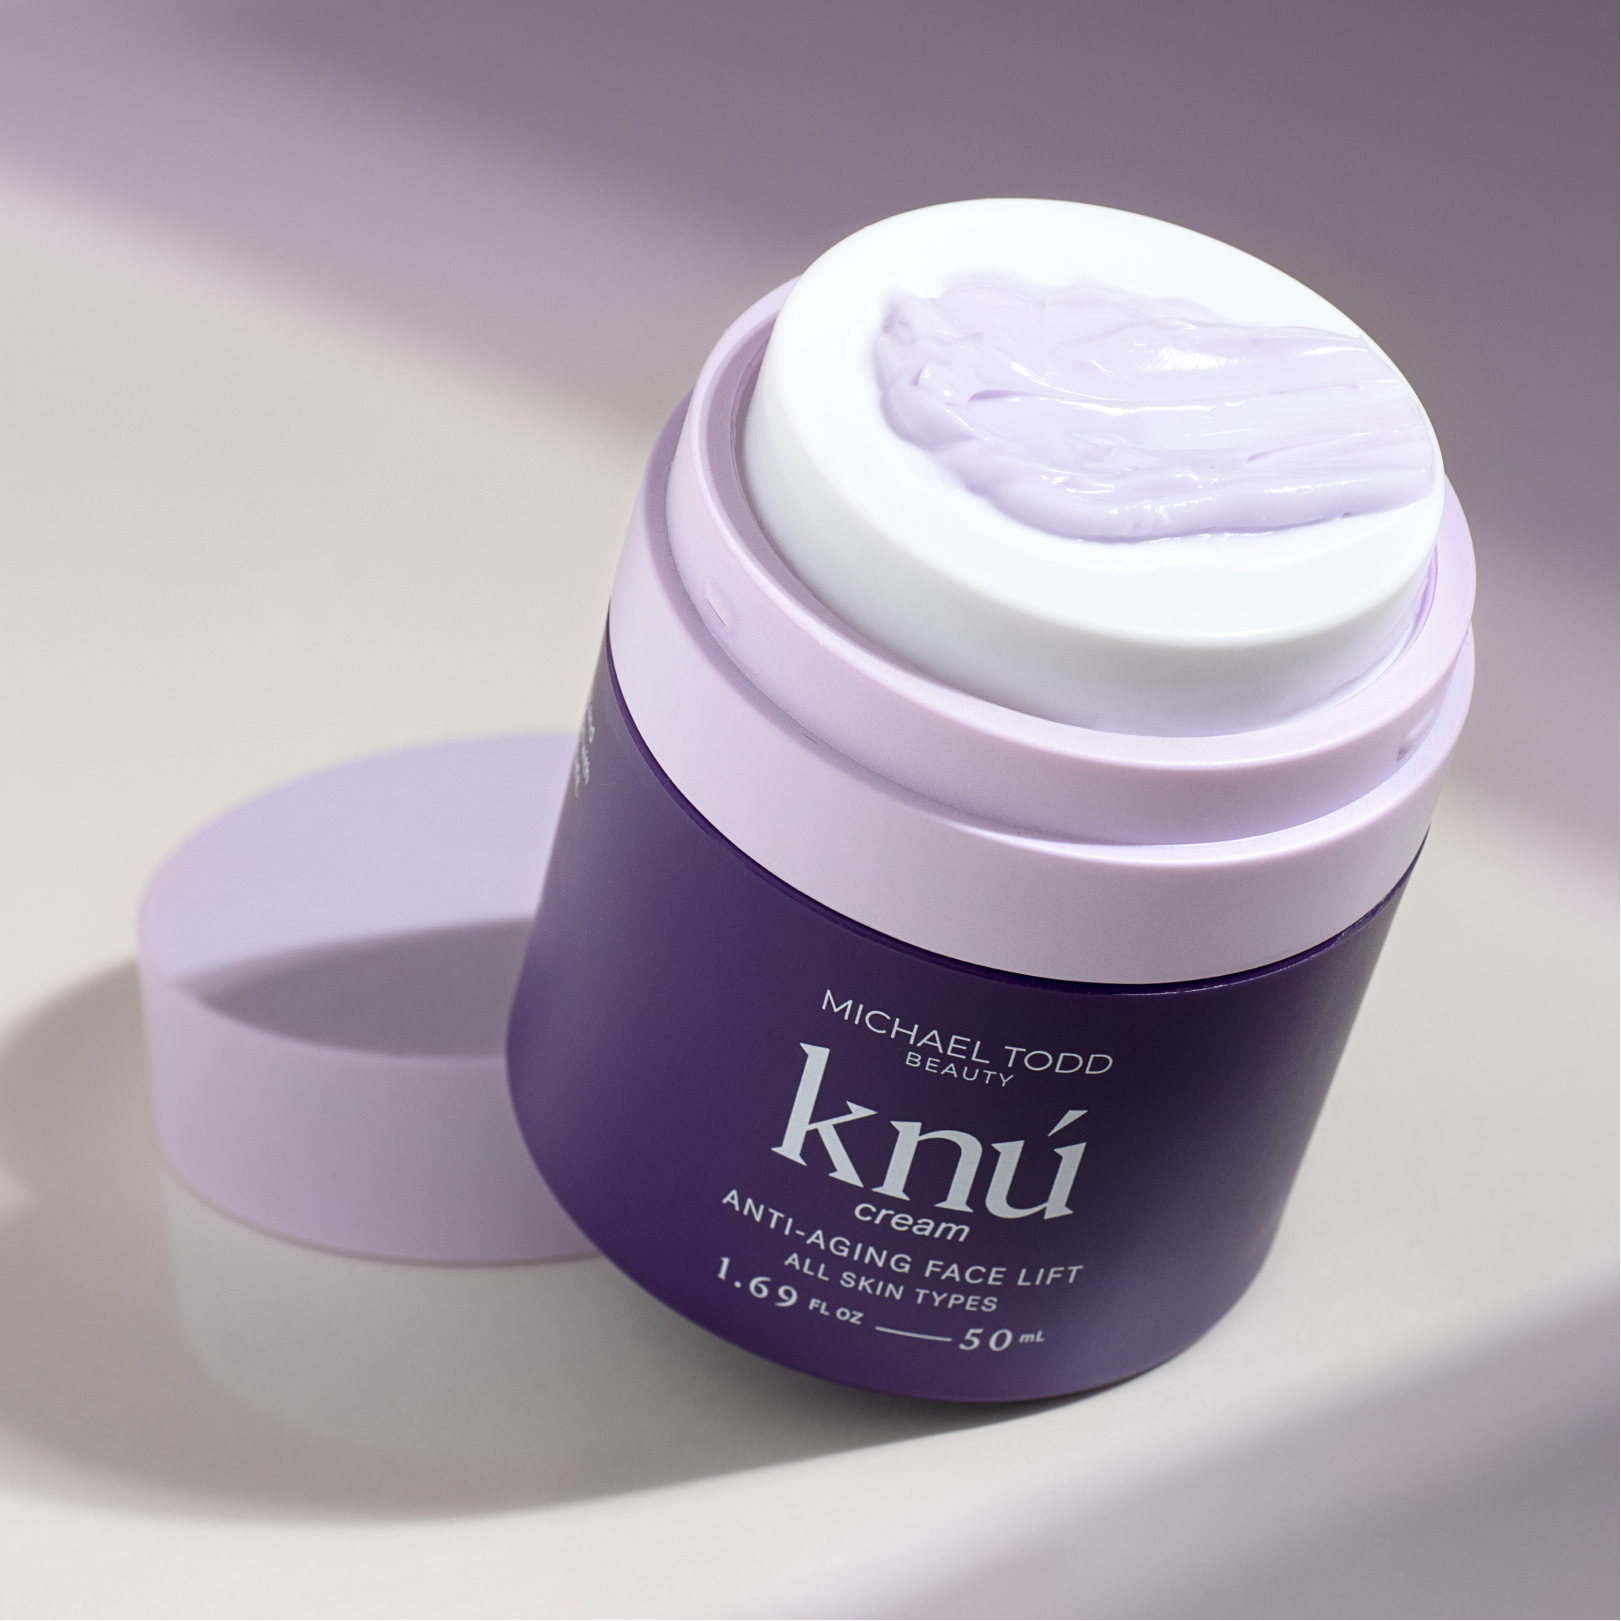 A purple container with a white lid, perfect for storing your favorite serum, The Knú Ageless Duo by Michael Todd Beauty.